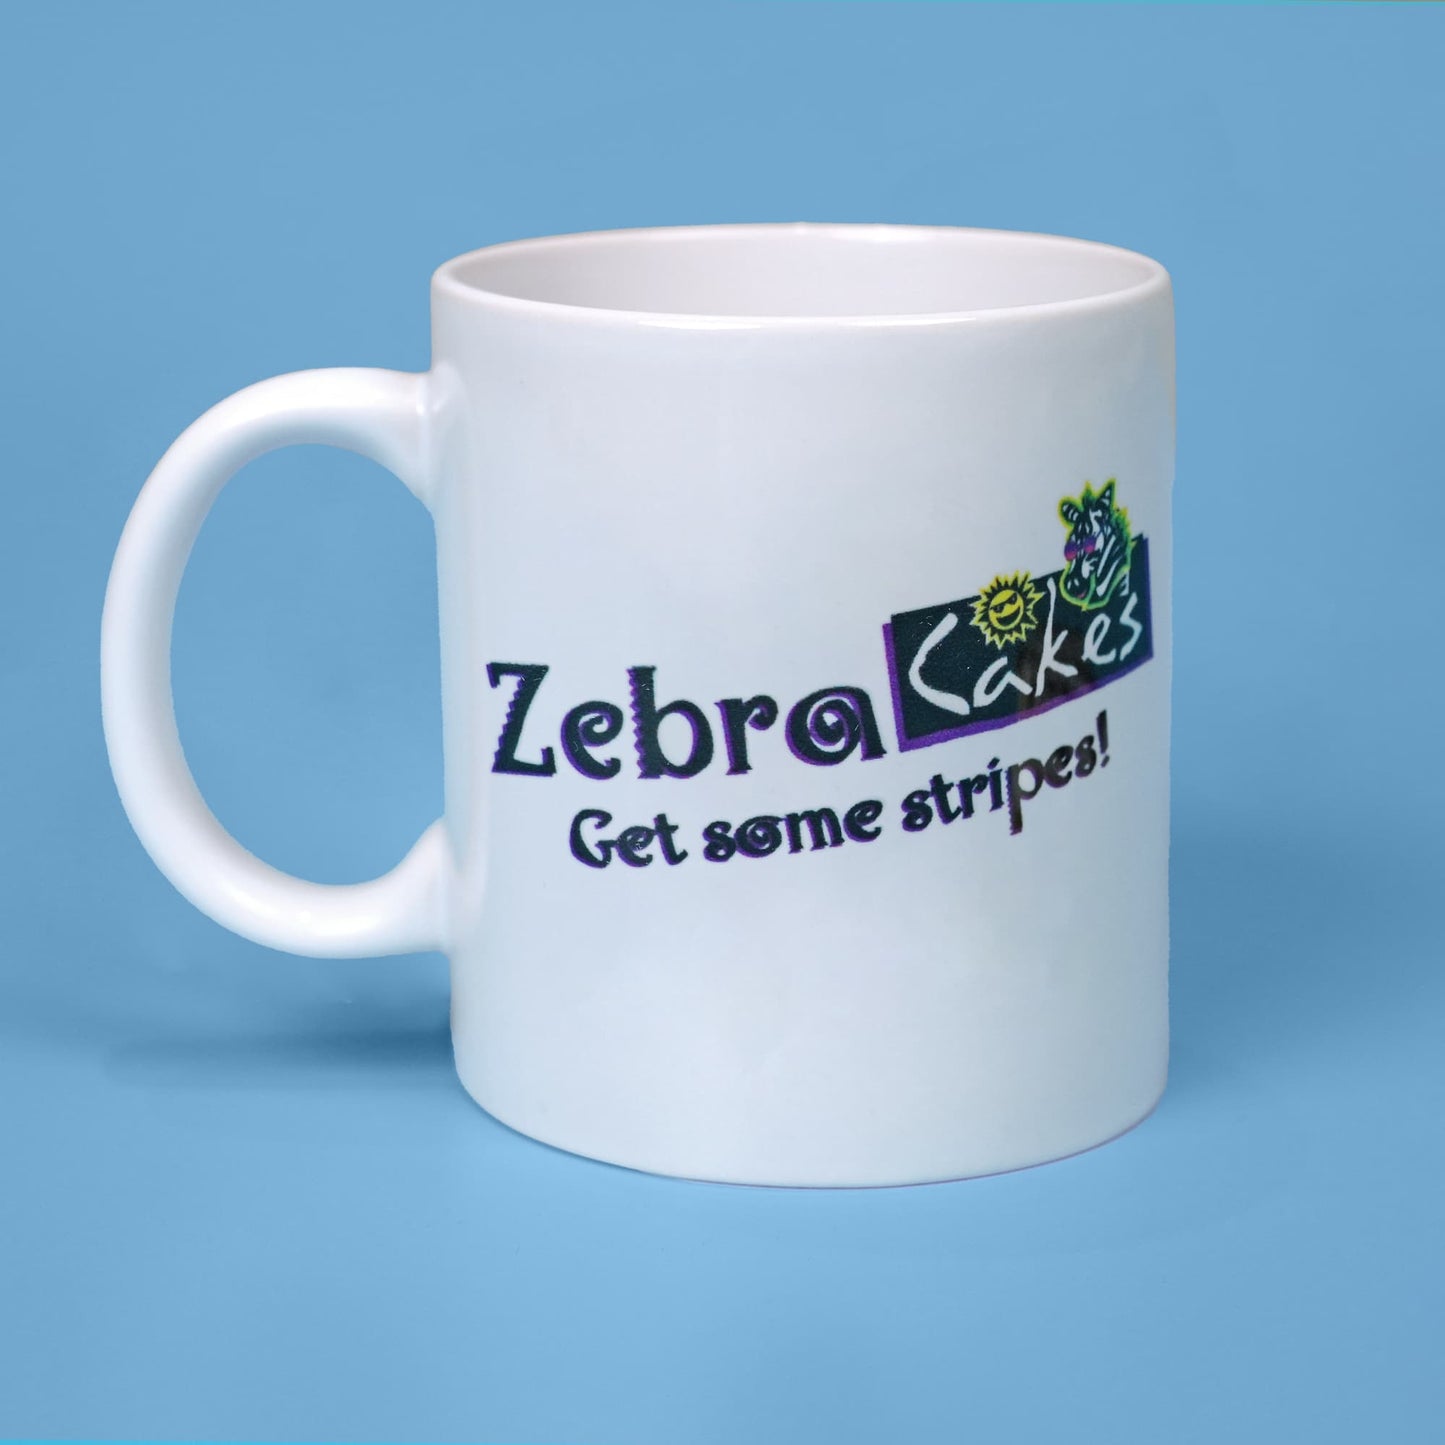 White ceramic mug with the 'Zebra Cakes' logo in purple letters and the slogan 'Get some stripes!' on it. Next to the text, there is a vibrant illustration of a cartoon zebra with a sun, both in purple, black, and yellow. The background of the mug is a soft blue.